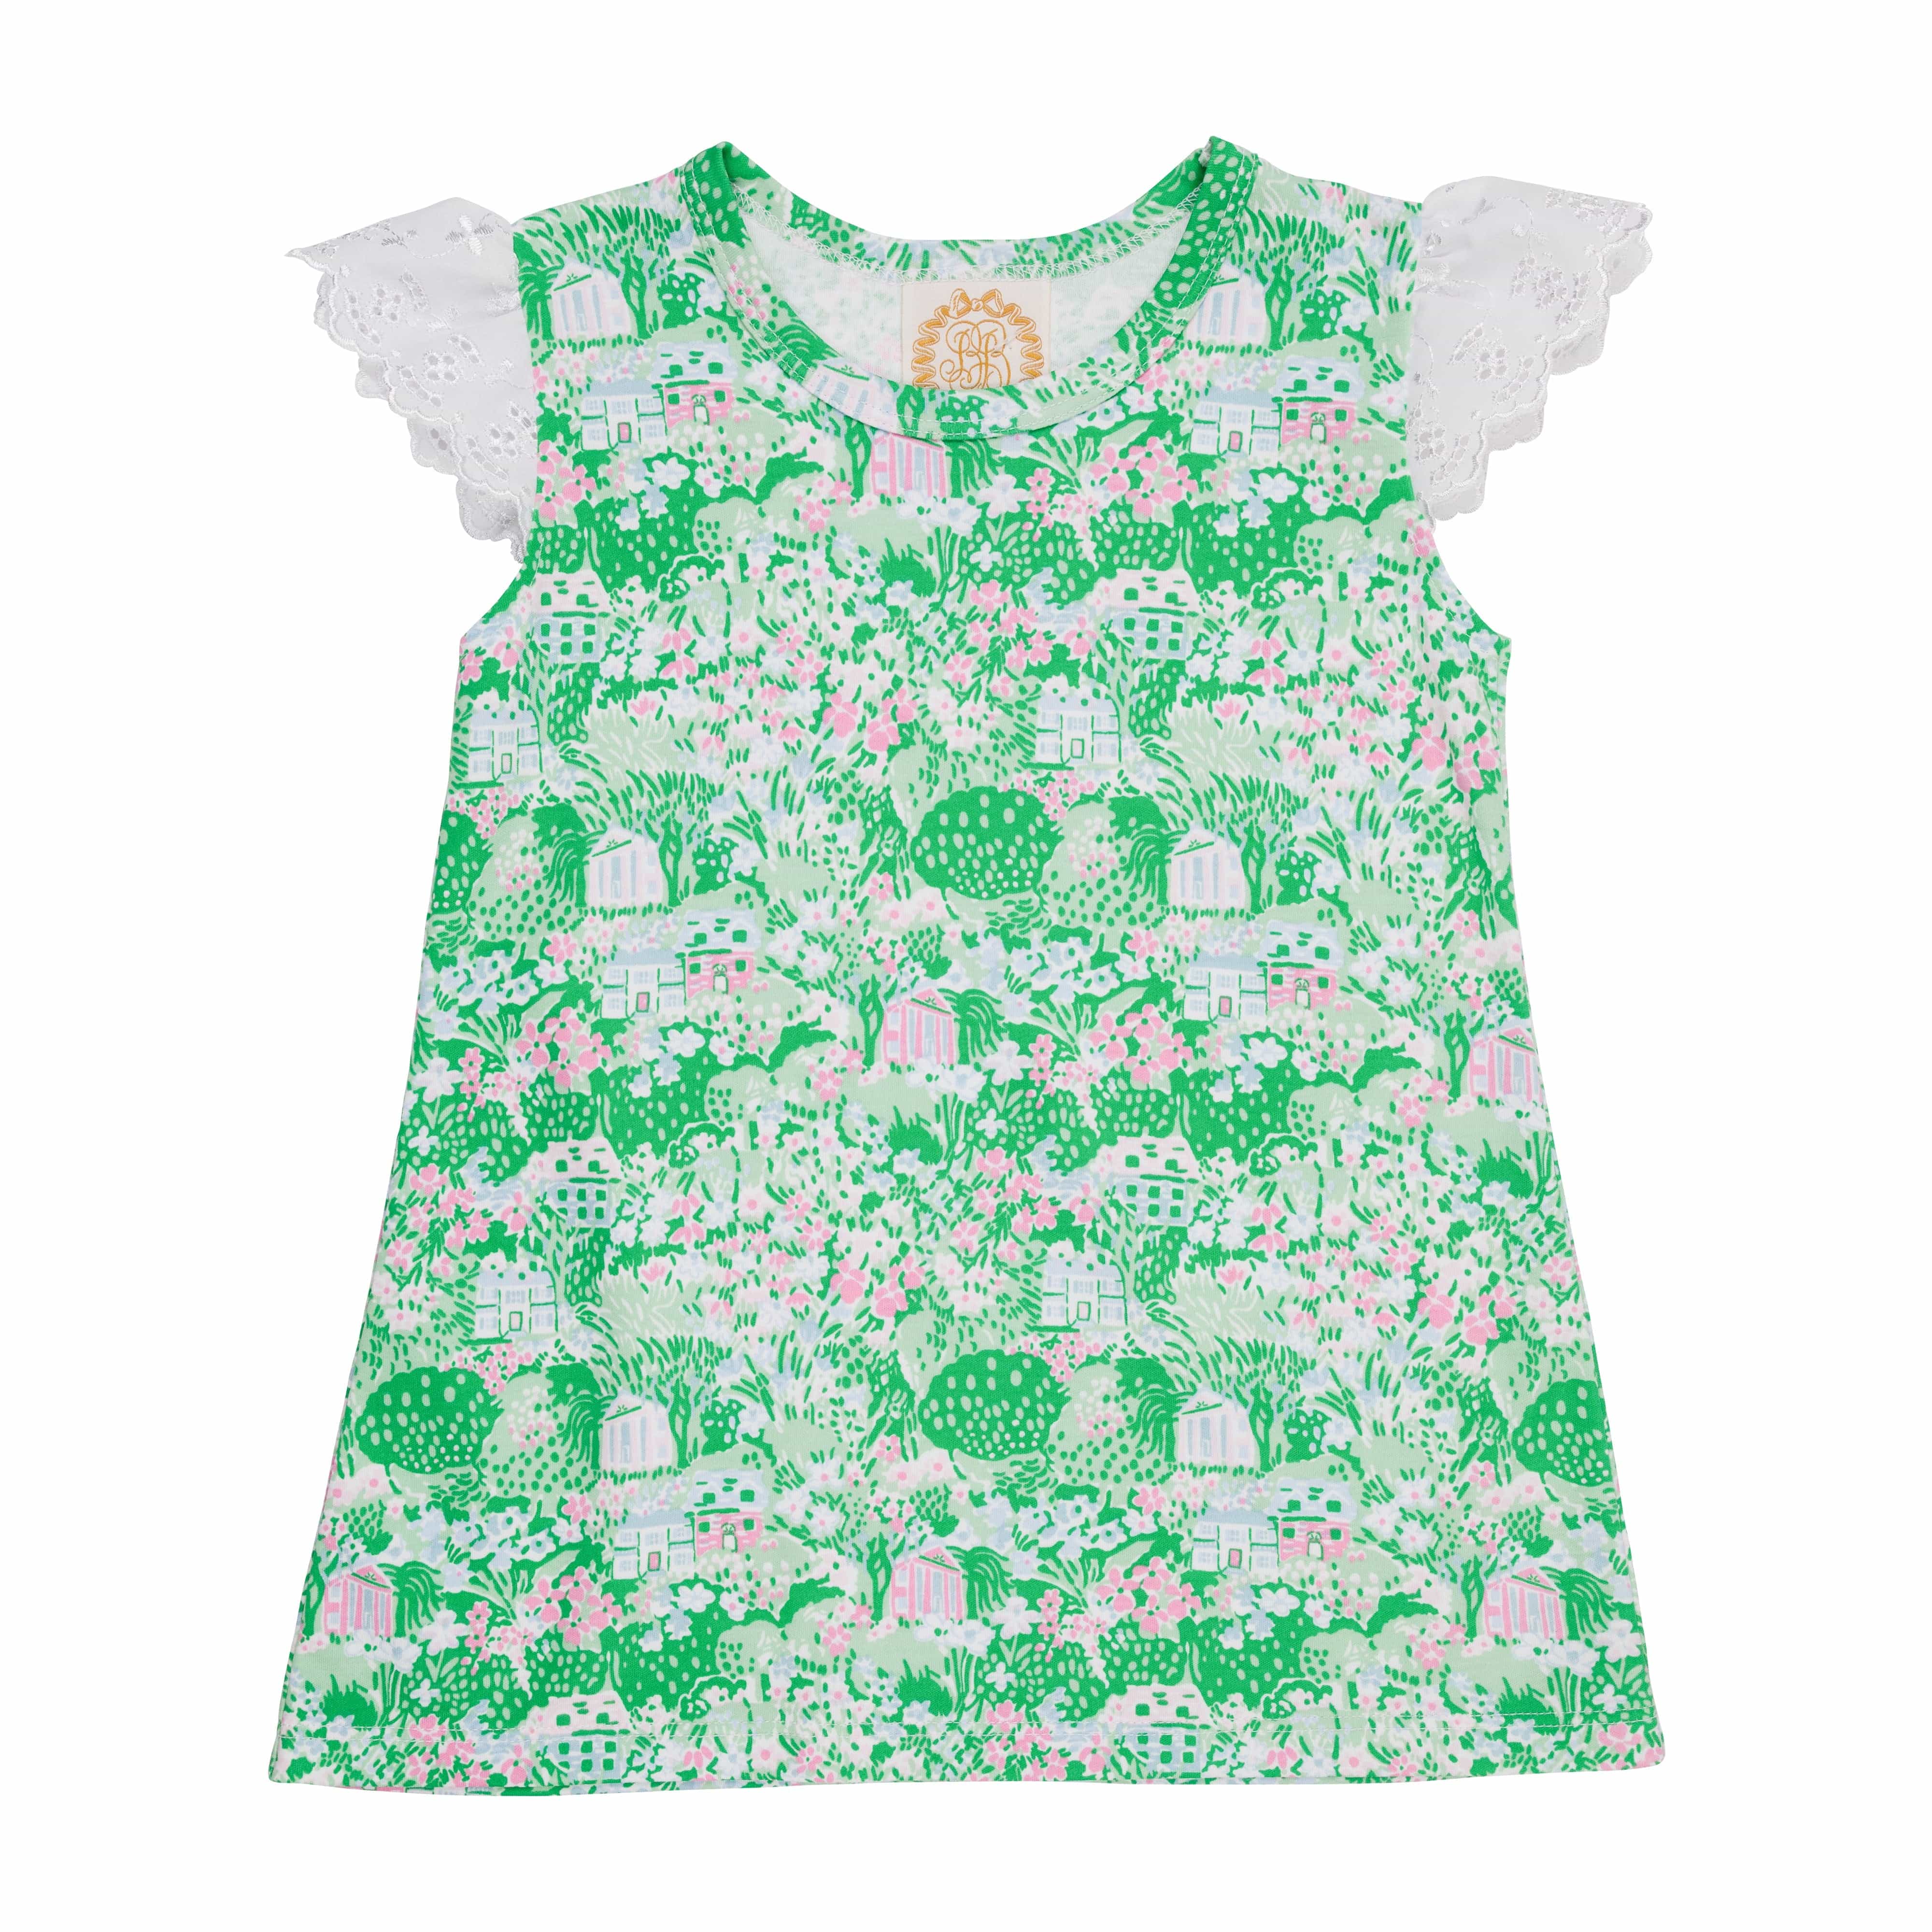 Beaufort Bonnet Company Beaufort Bonnet Company Worth Avenue White Belmont Blooms with Worth Avenue White Eyelet Polly Play shirt - Little Miss Muffin Children & Home